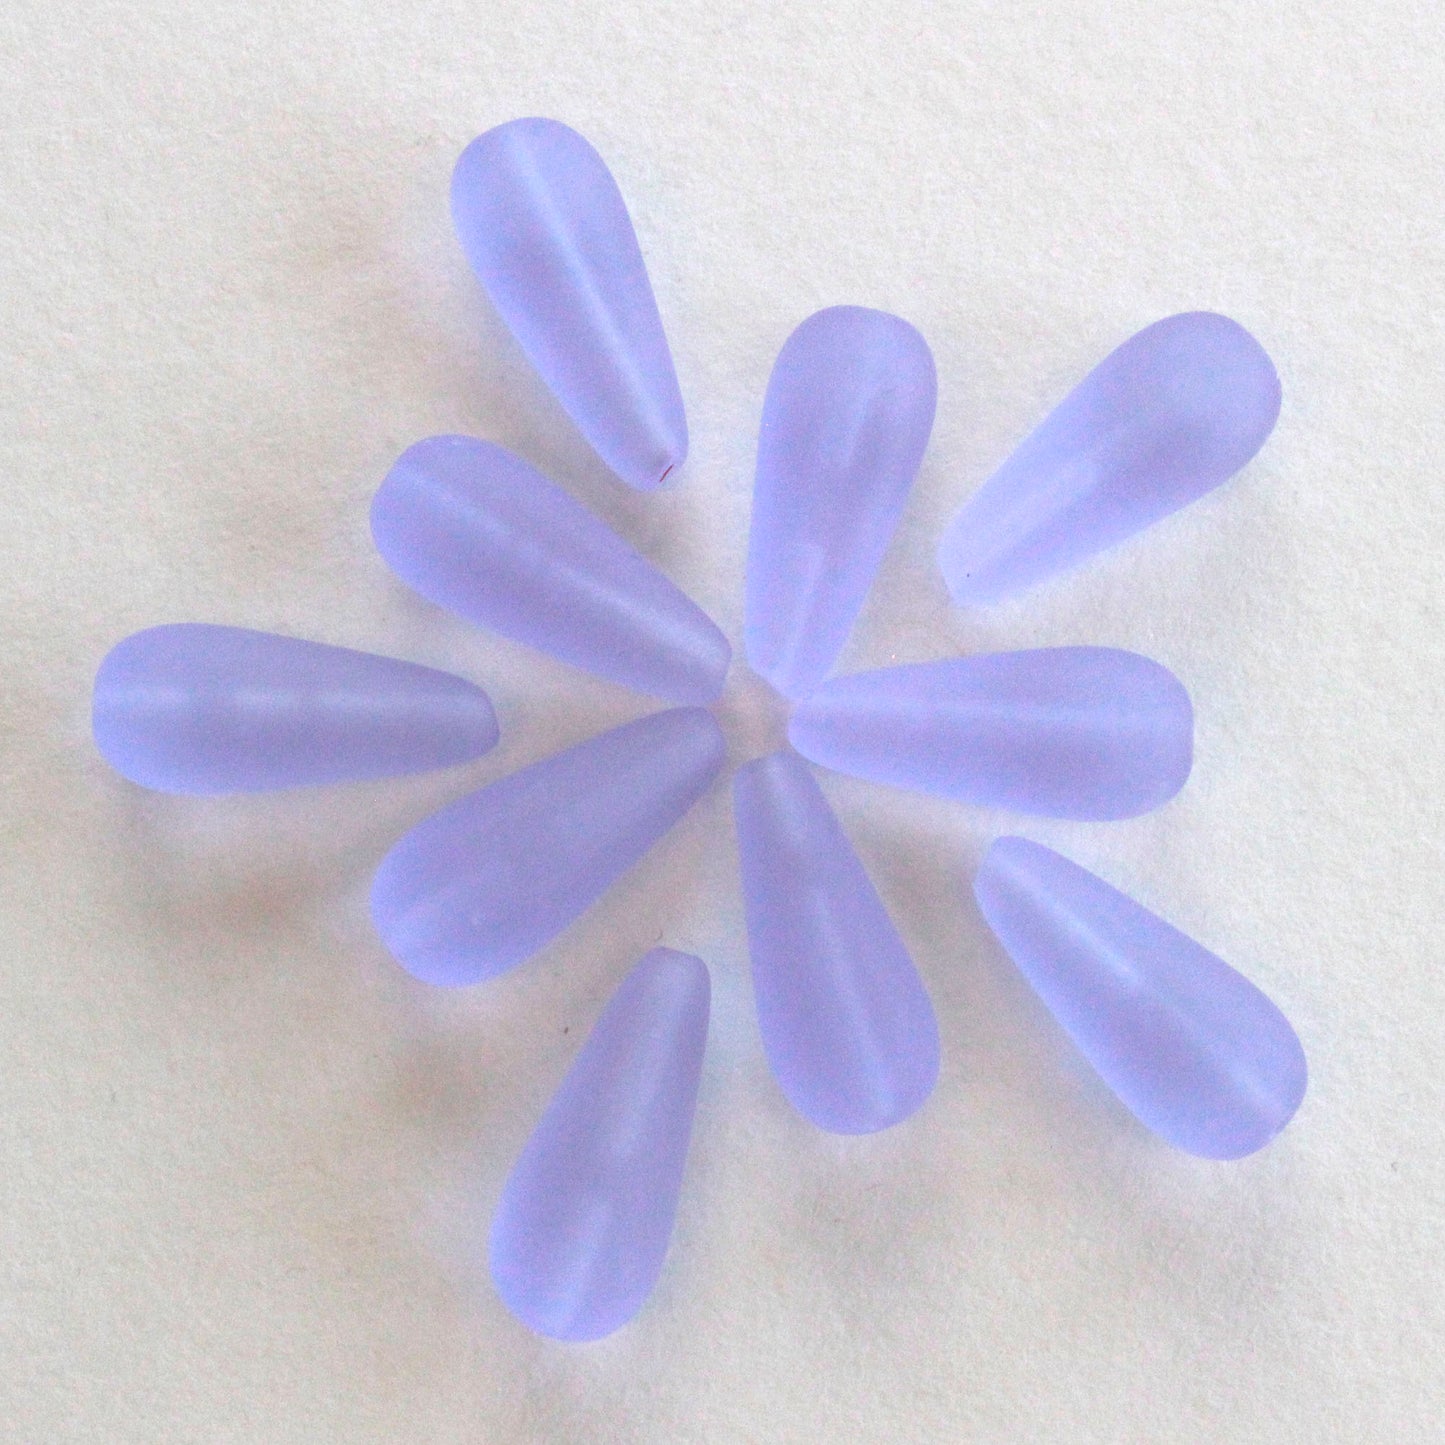 9x20mm Long Drilled Drops - Frosted Lilac - 20 Beads